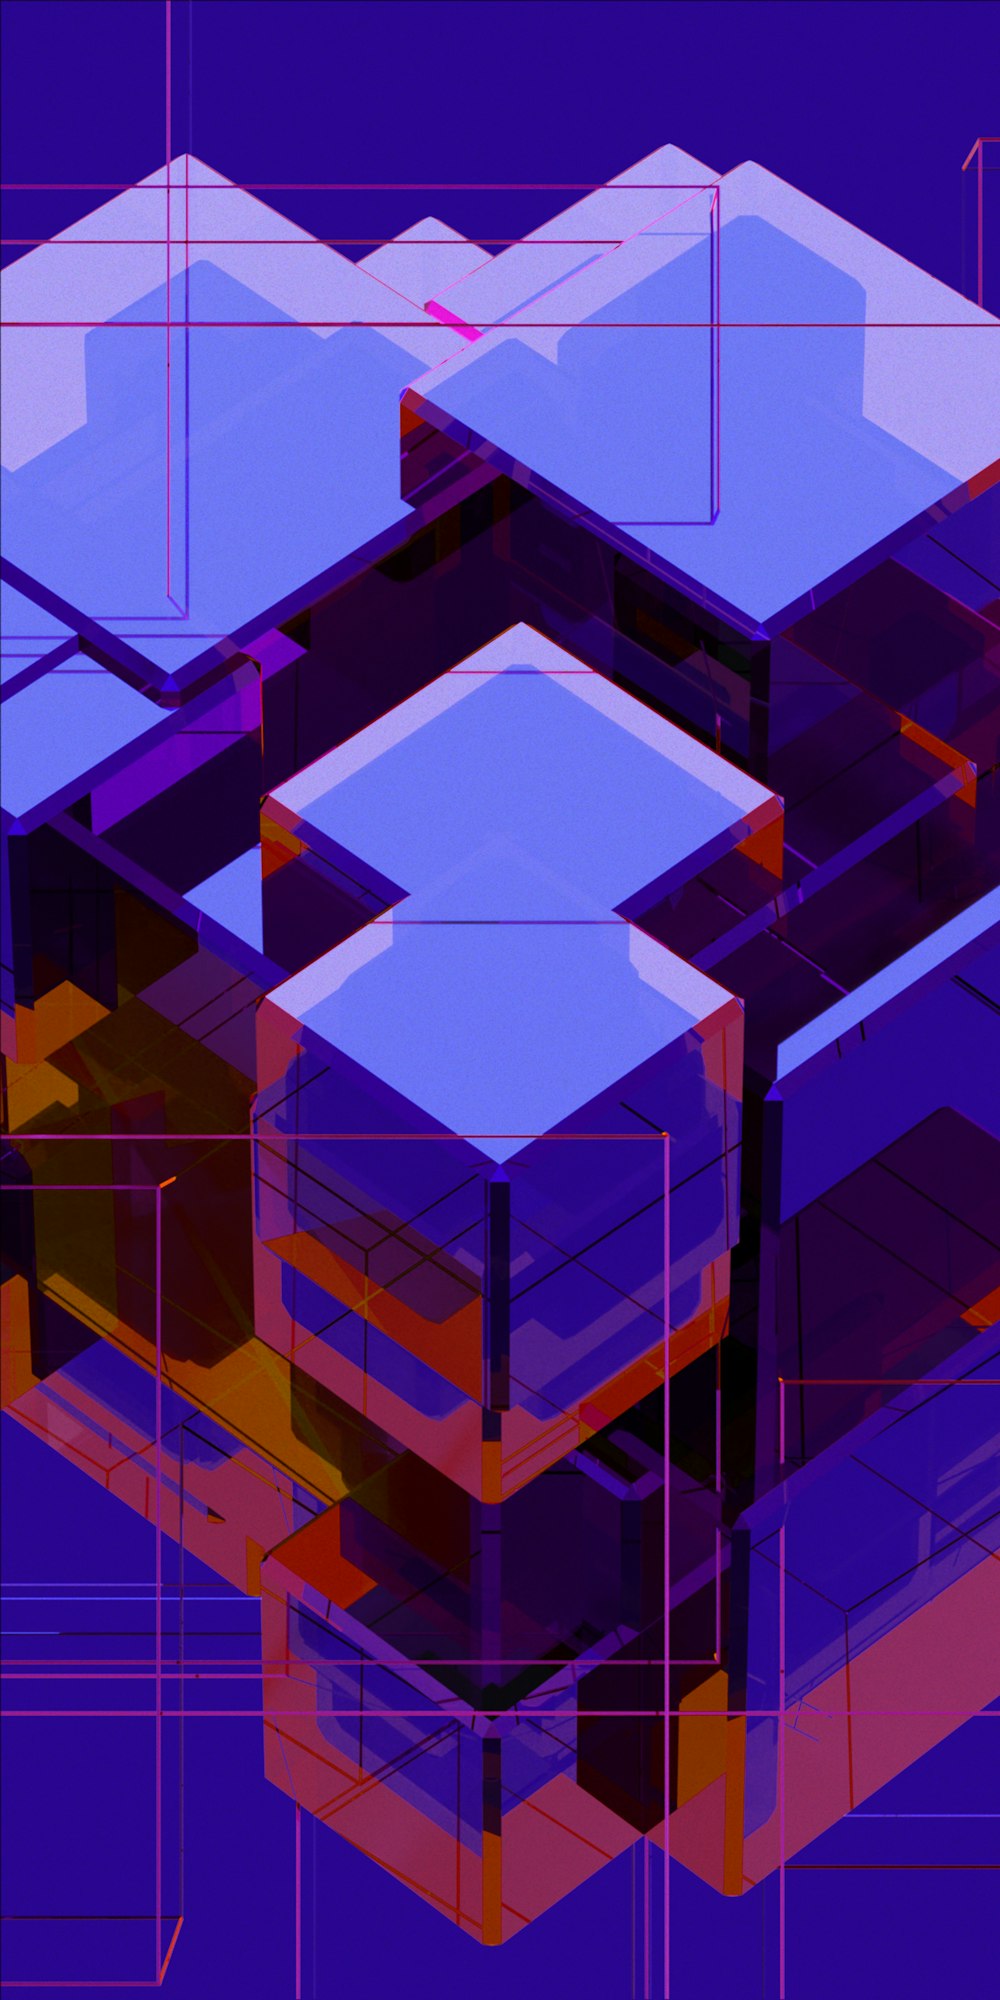 a blue and purple abstract image of a house